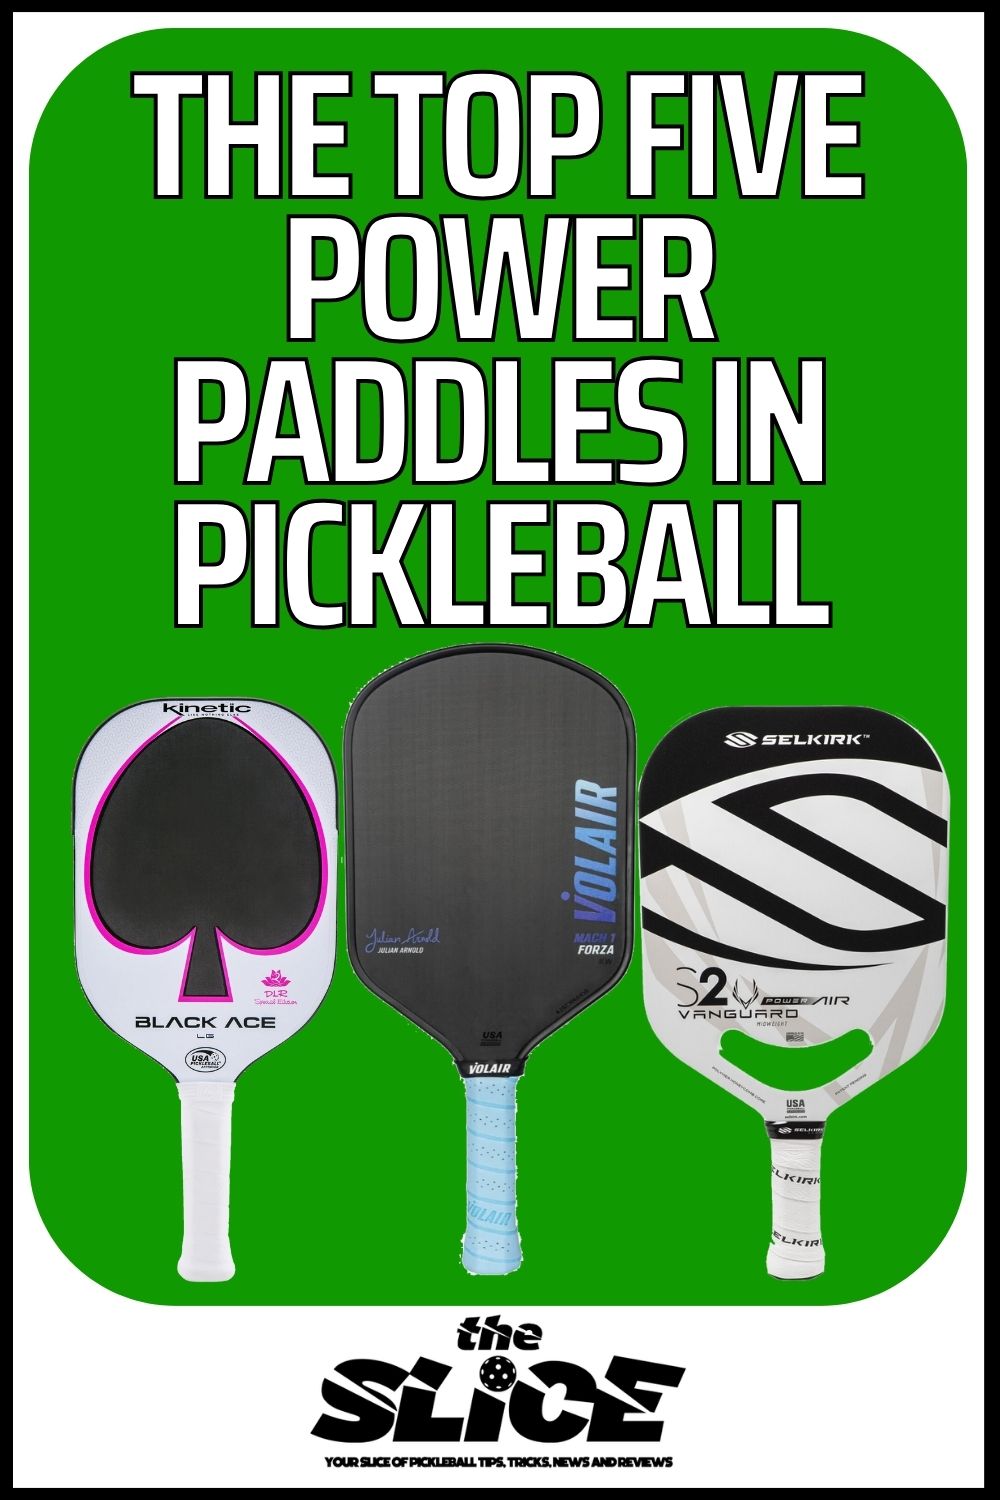 The Top Five Pickleball Paddles for Power